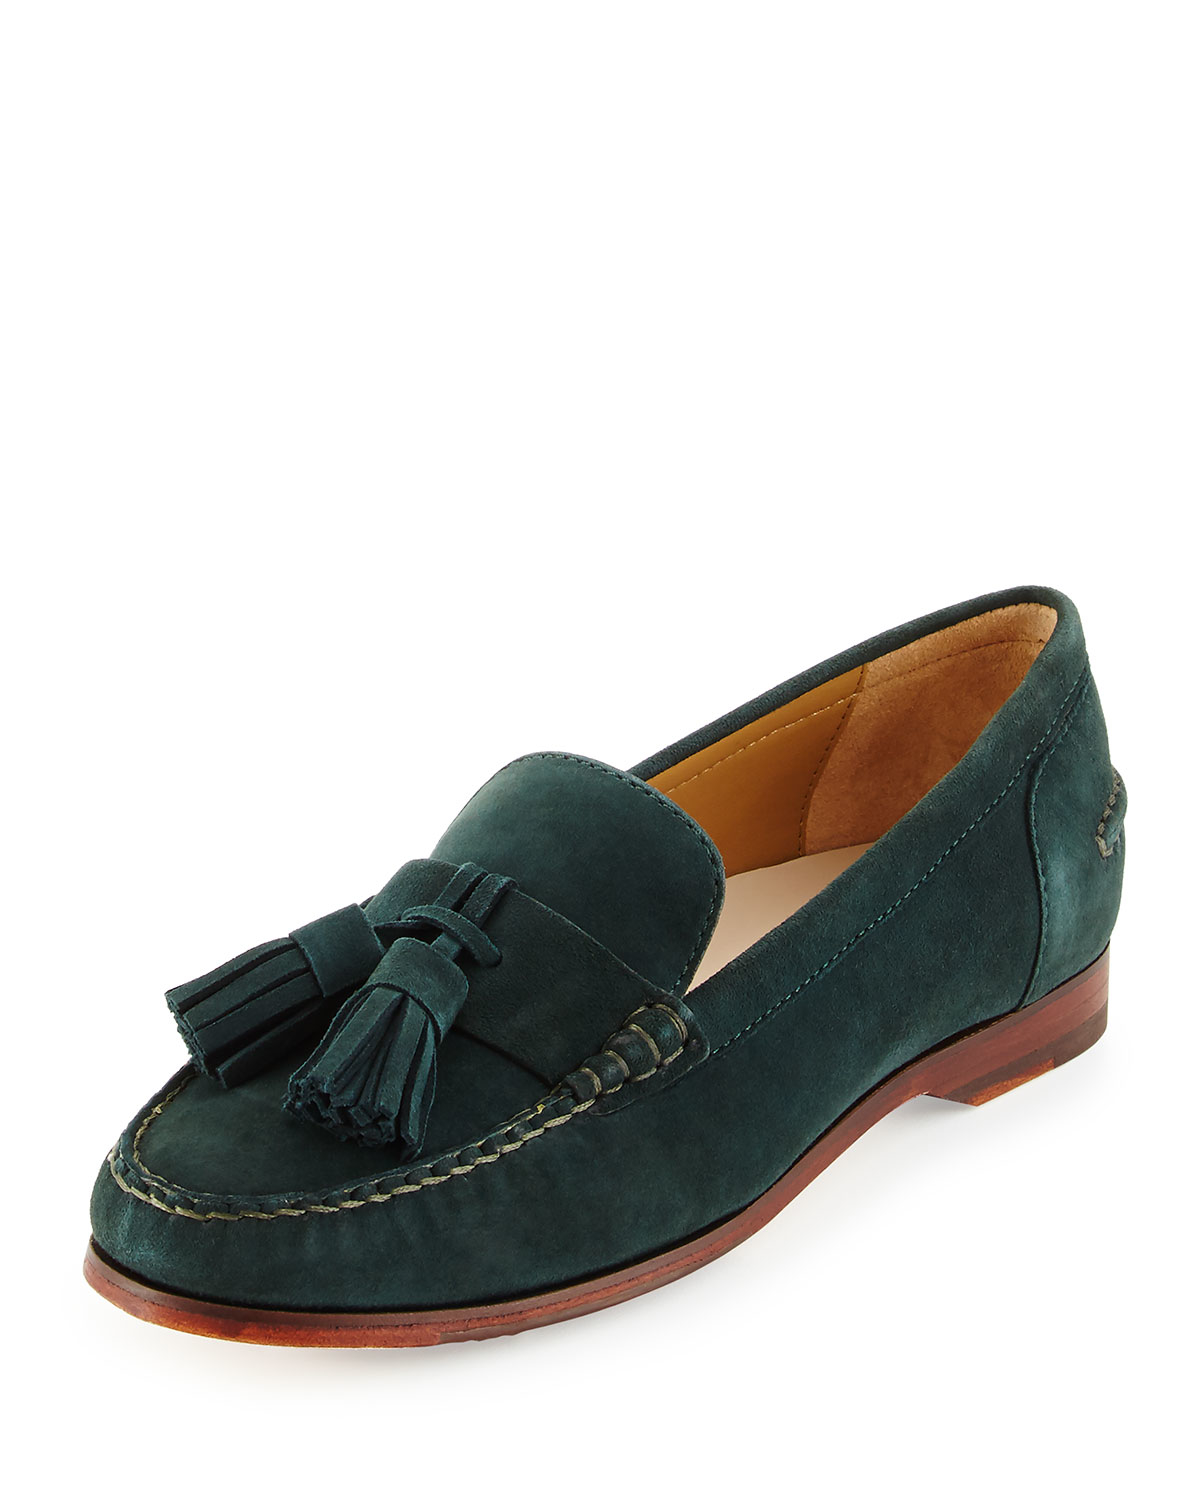 Cole haan Pinch Grand OS Tassel Loafers in Green | Lyst